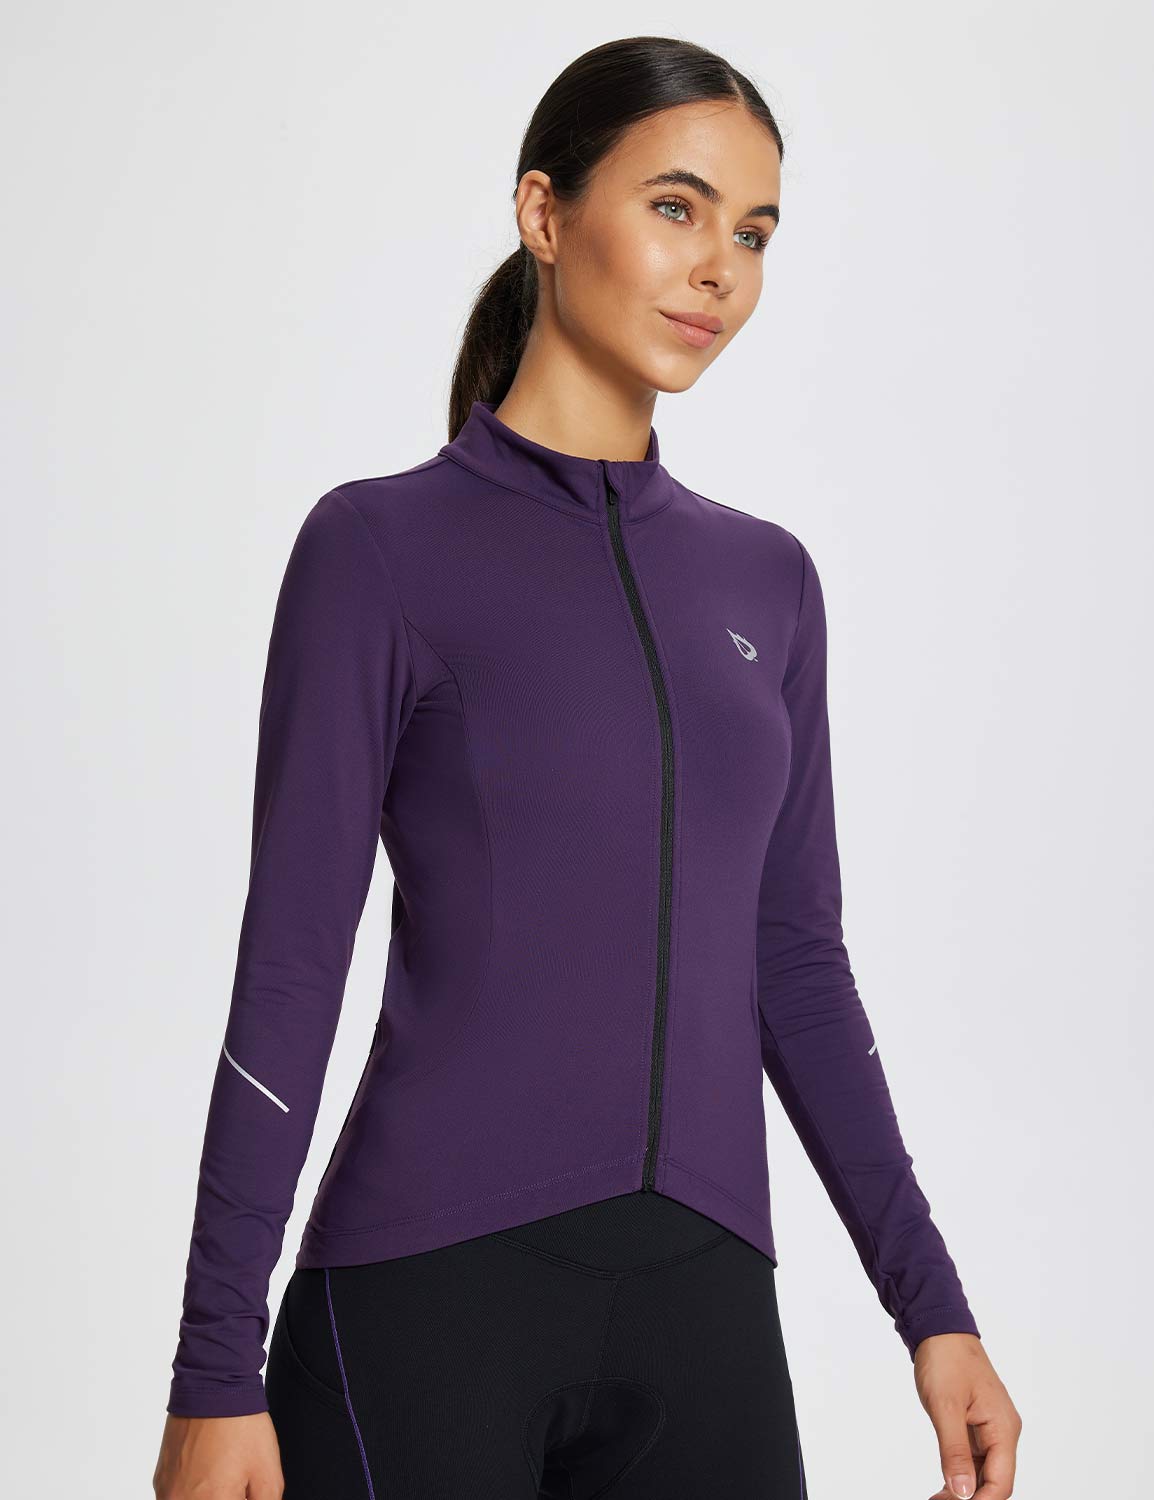 Baleaf Women's Laureate Thermal Pocketed Cycling Jersey dai042 Shadow Purple Side